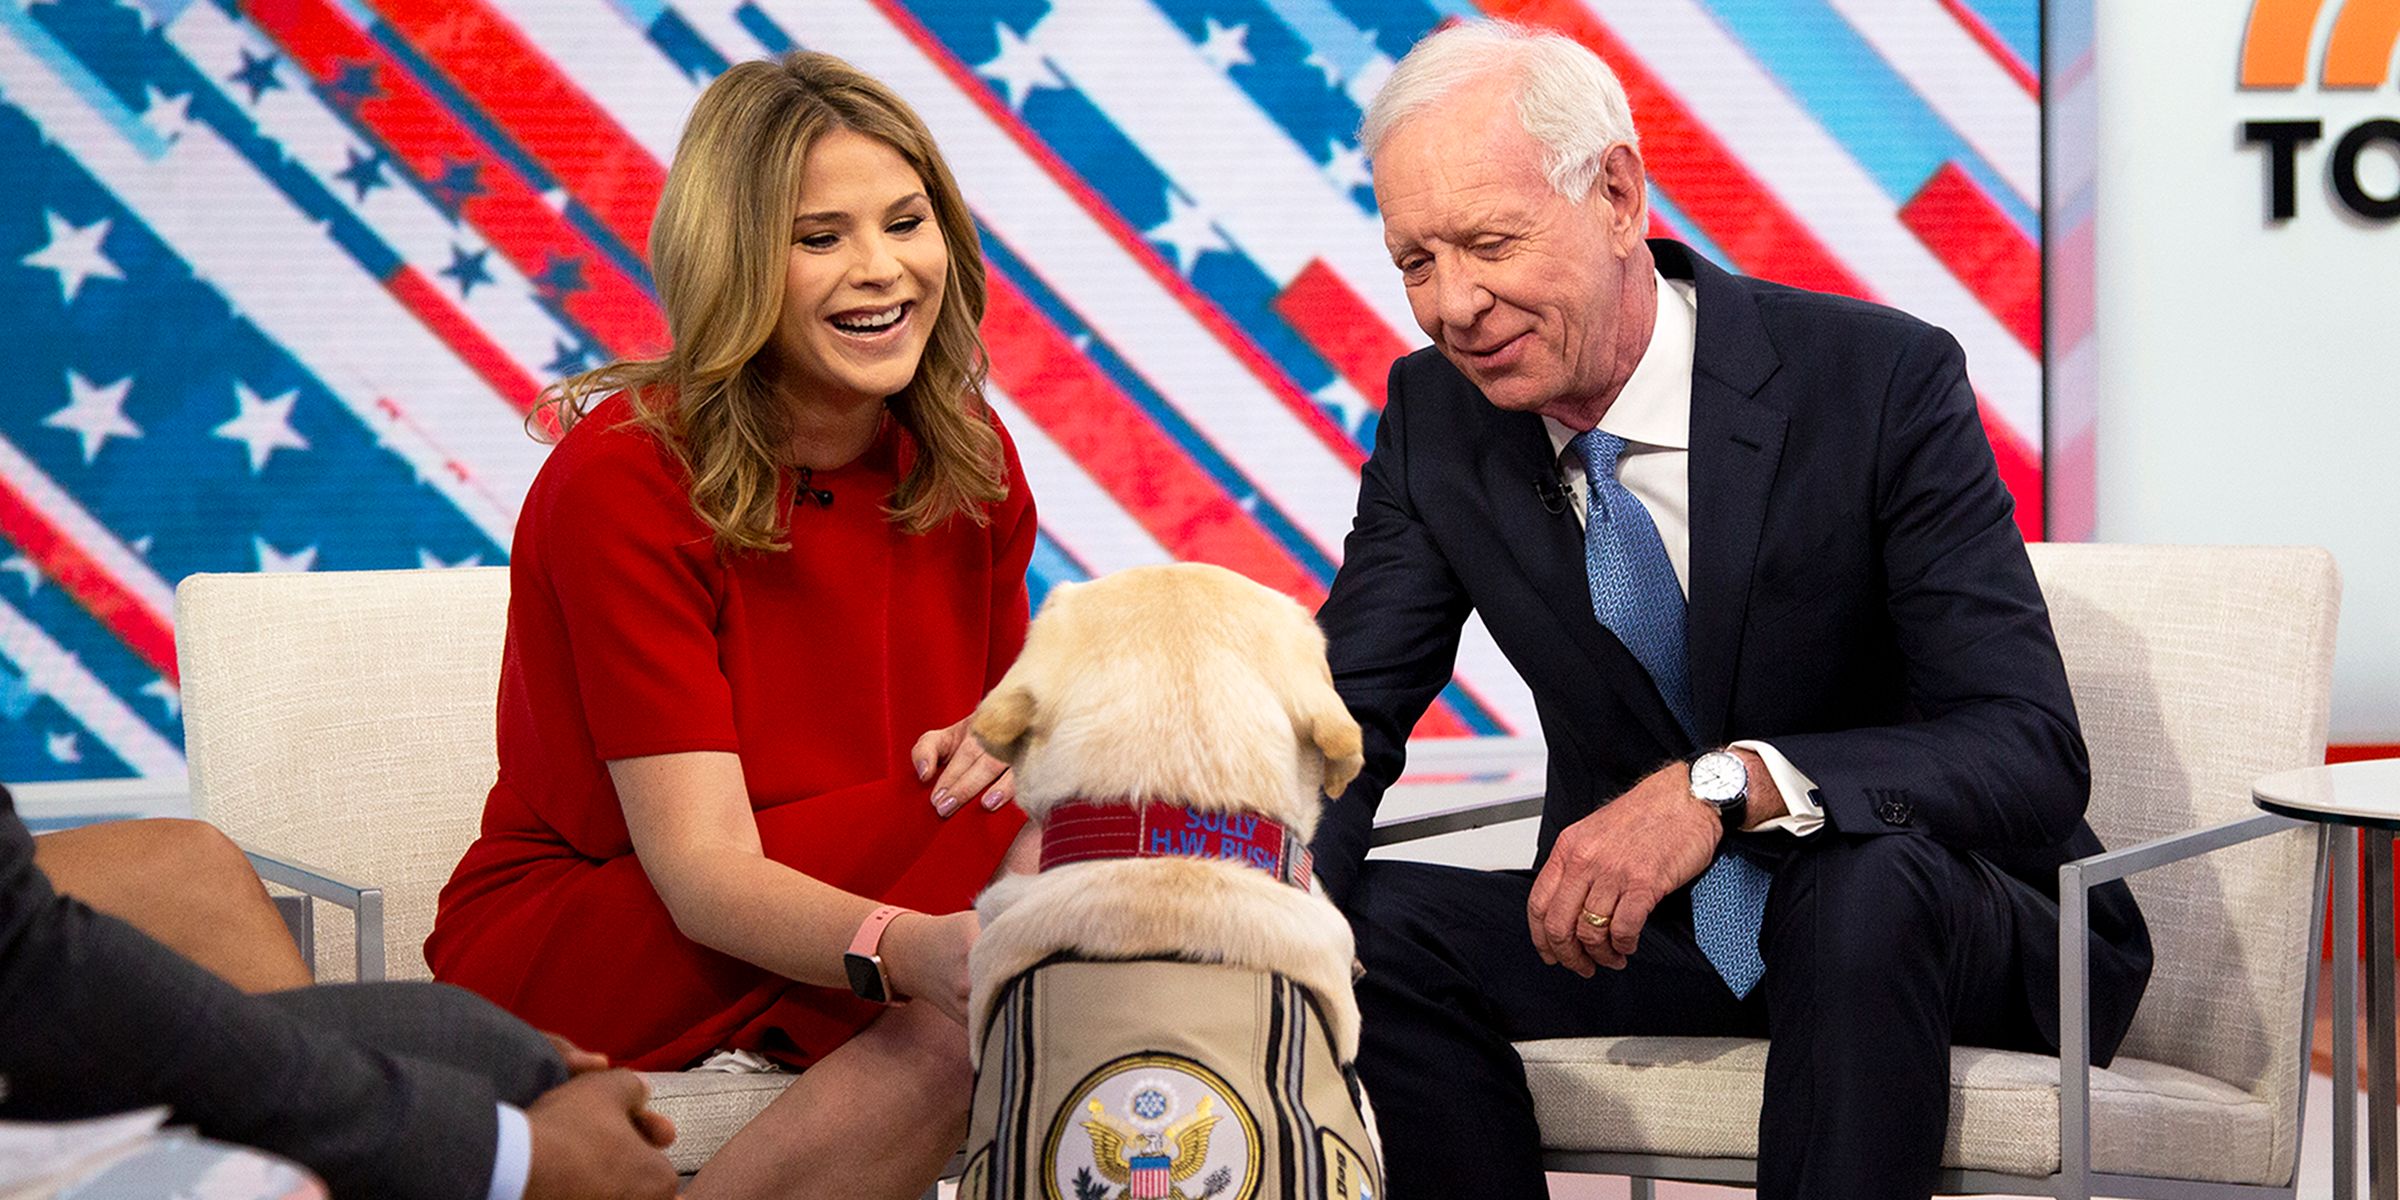 sully-the-dog-meets-sully-the-human-today-main-190221_78e146e6a45758a9d37c6c0b69a08677.jpg